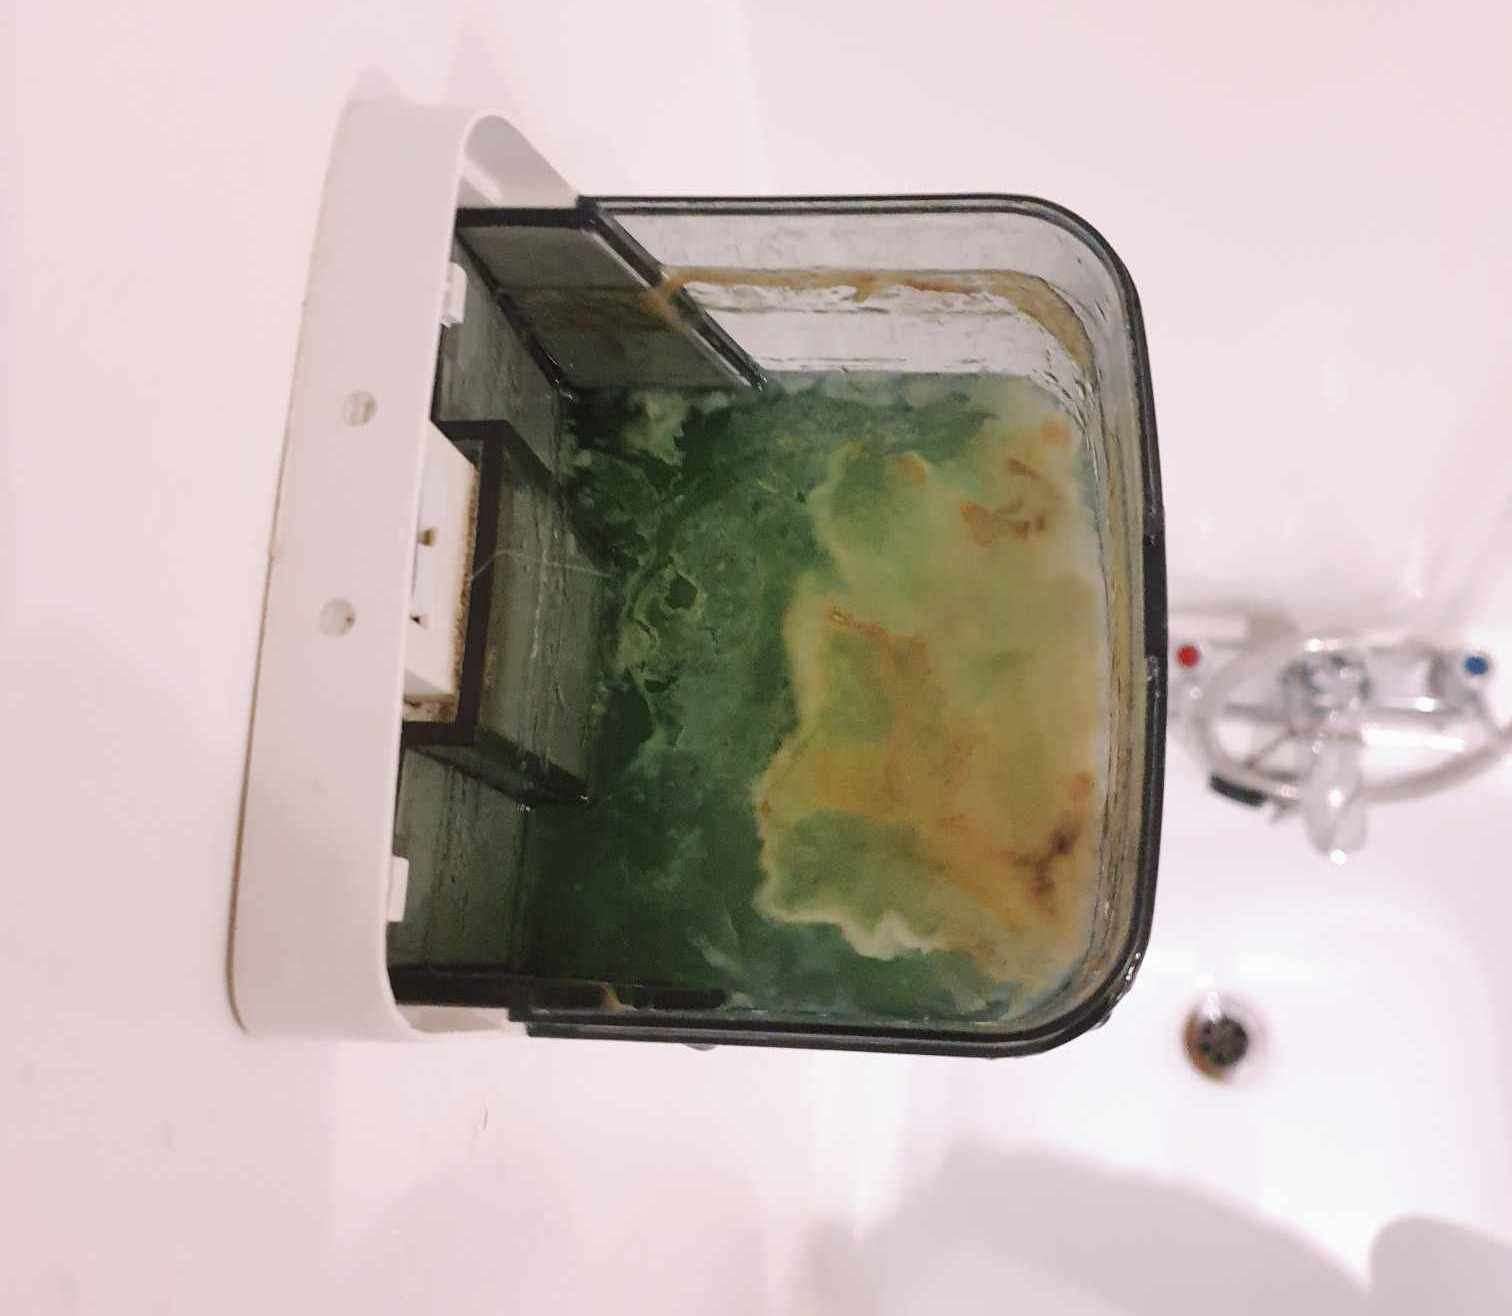 Ben Brookland was horrified to discover mould in a shampoo dispenser at the Grand Burstin, Folkestone